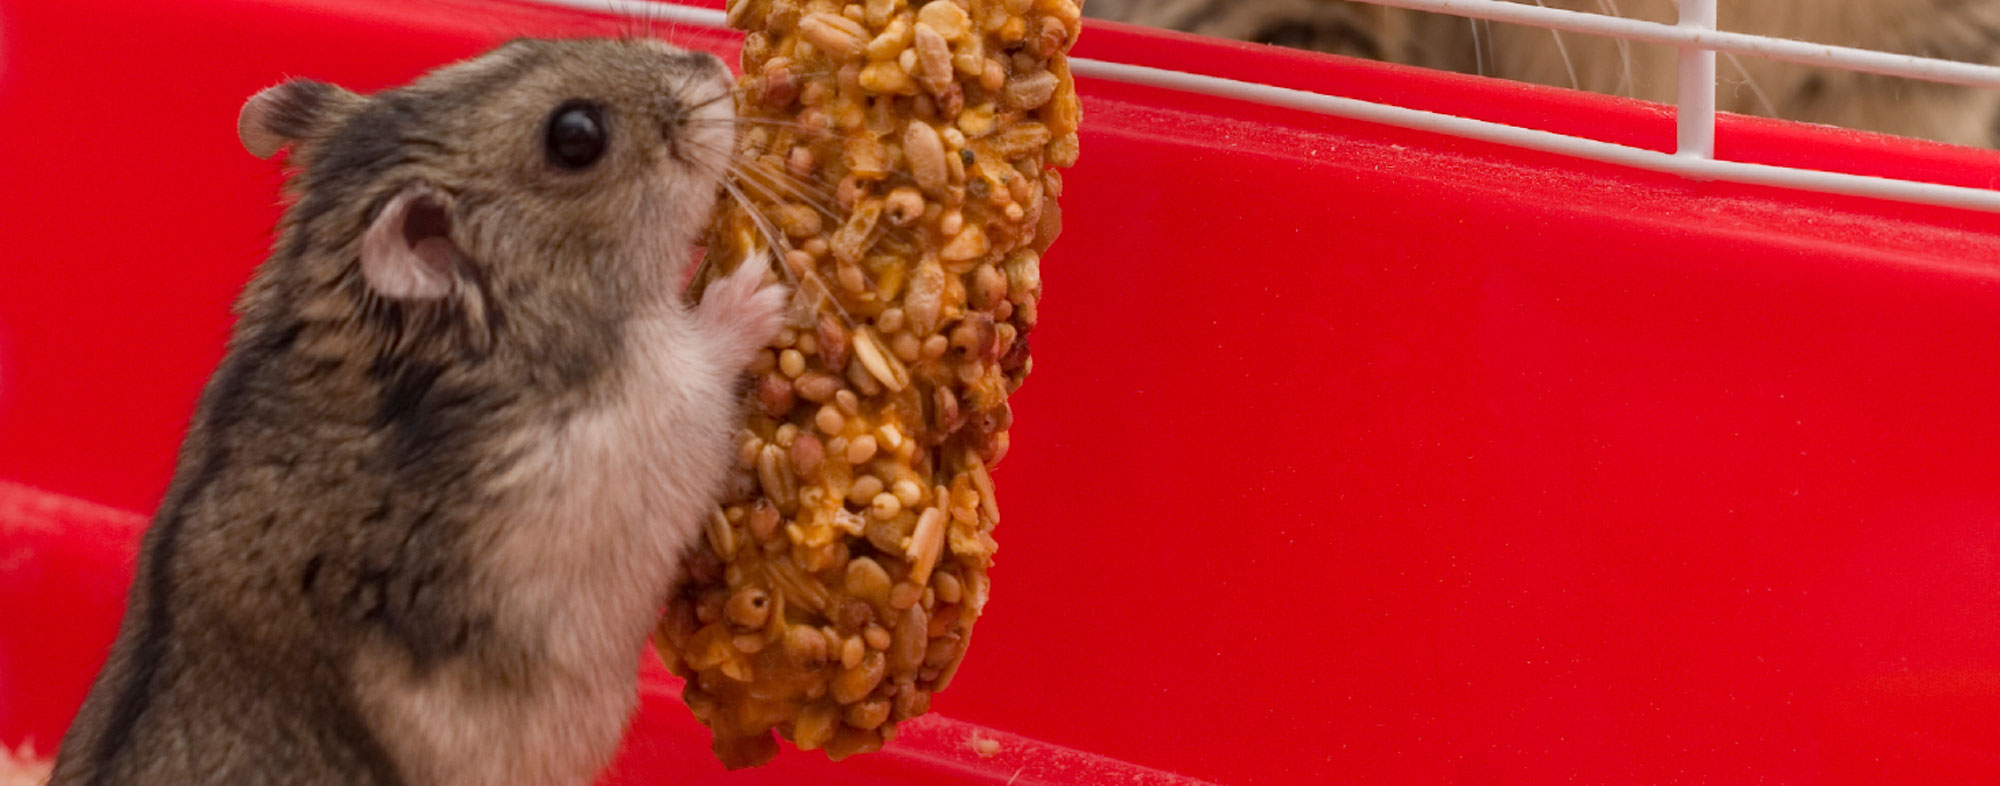 Pet mouse nibbling on a nutritional treat supplement for small animals